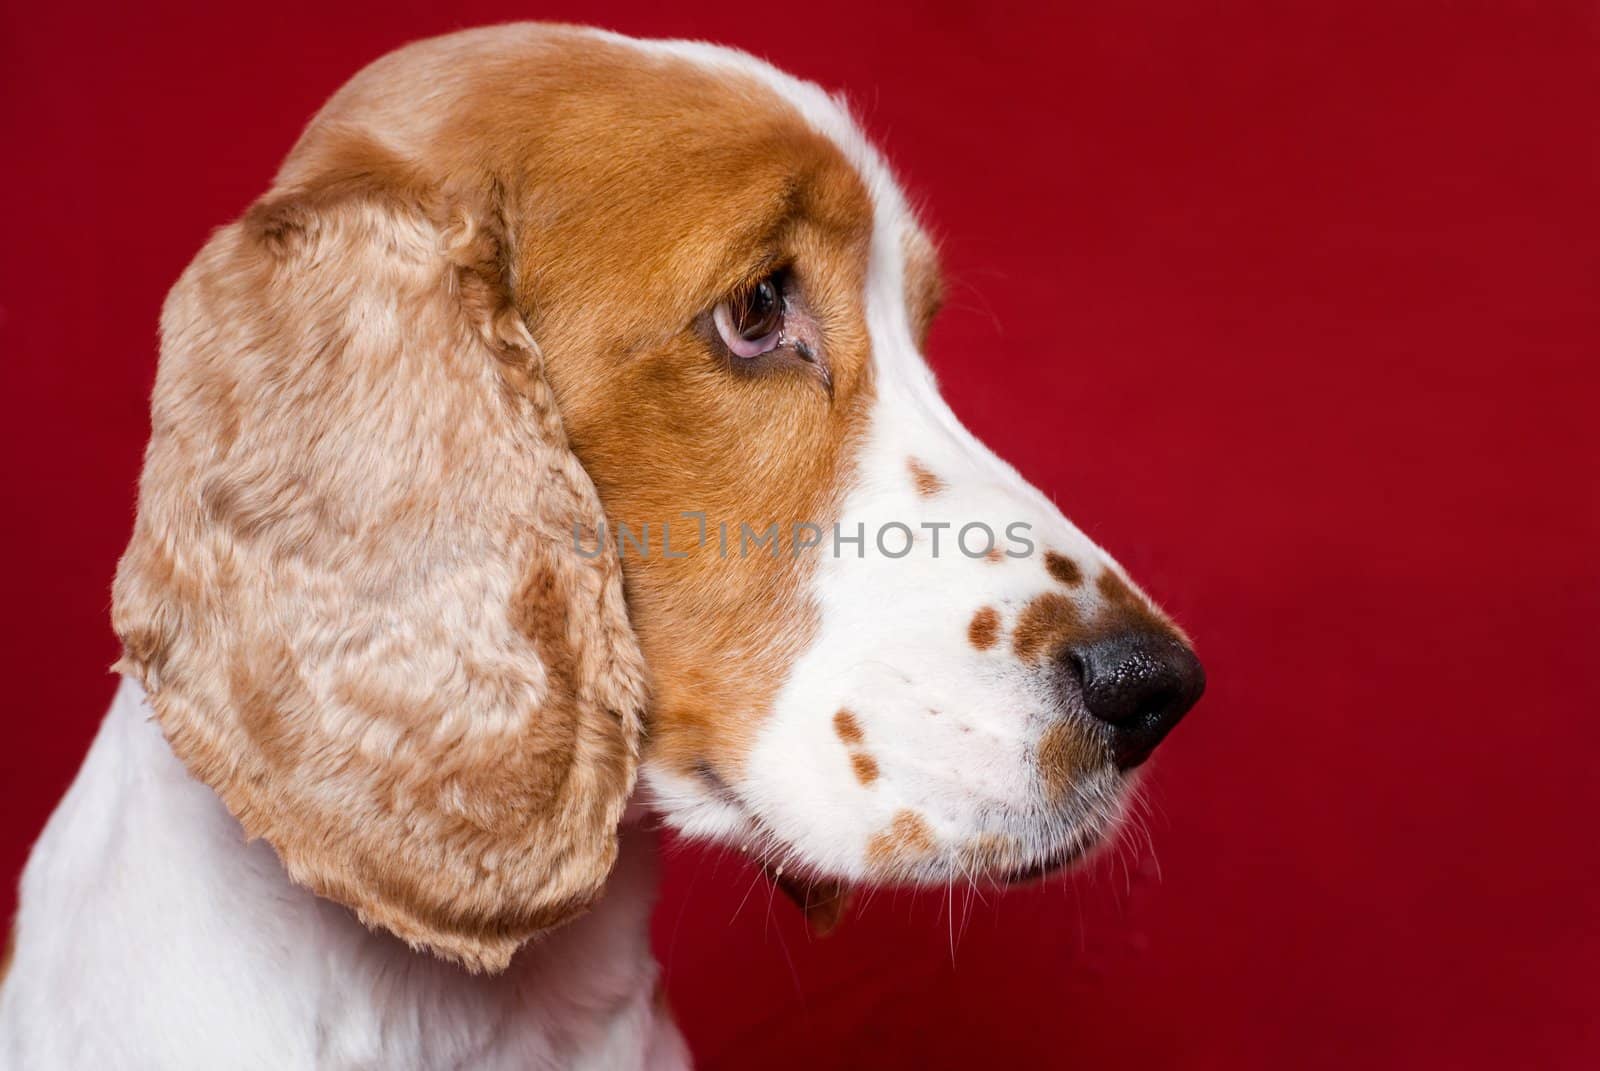 Mug shot like profile of spaniel . Red copy space on the right.